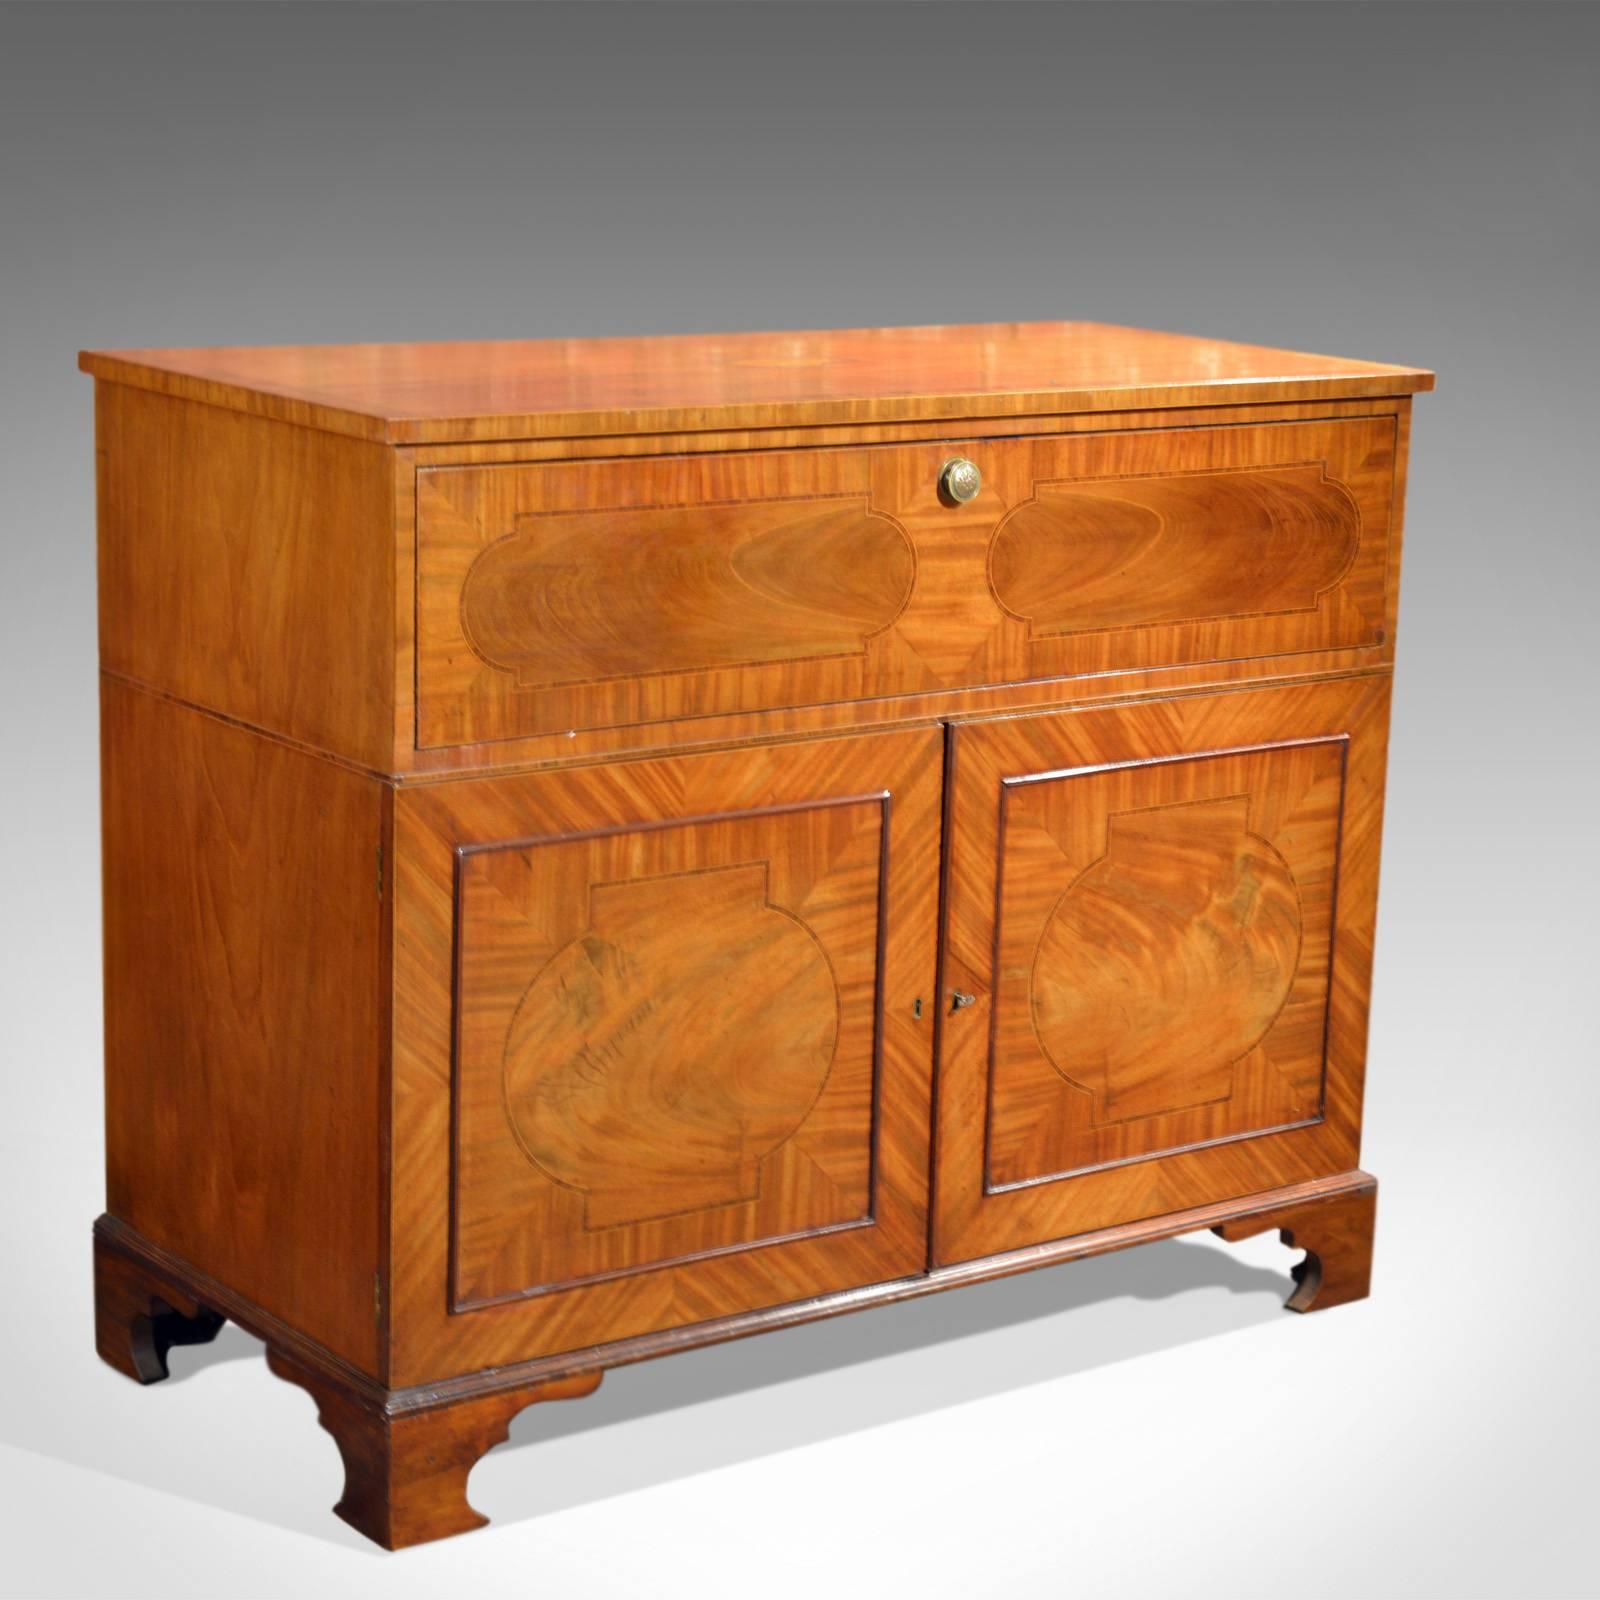 This is a mahogany antique secretaire cabinet dating to the latter part of the 18th century, circa 1780.

An attractive and functional piece of furniture it offers an upper secretaire, drop front drawer above a twin door cupboard enclosing a